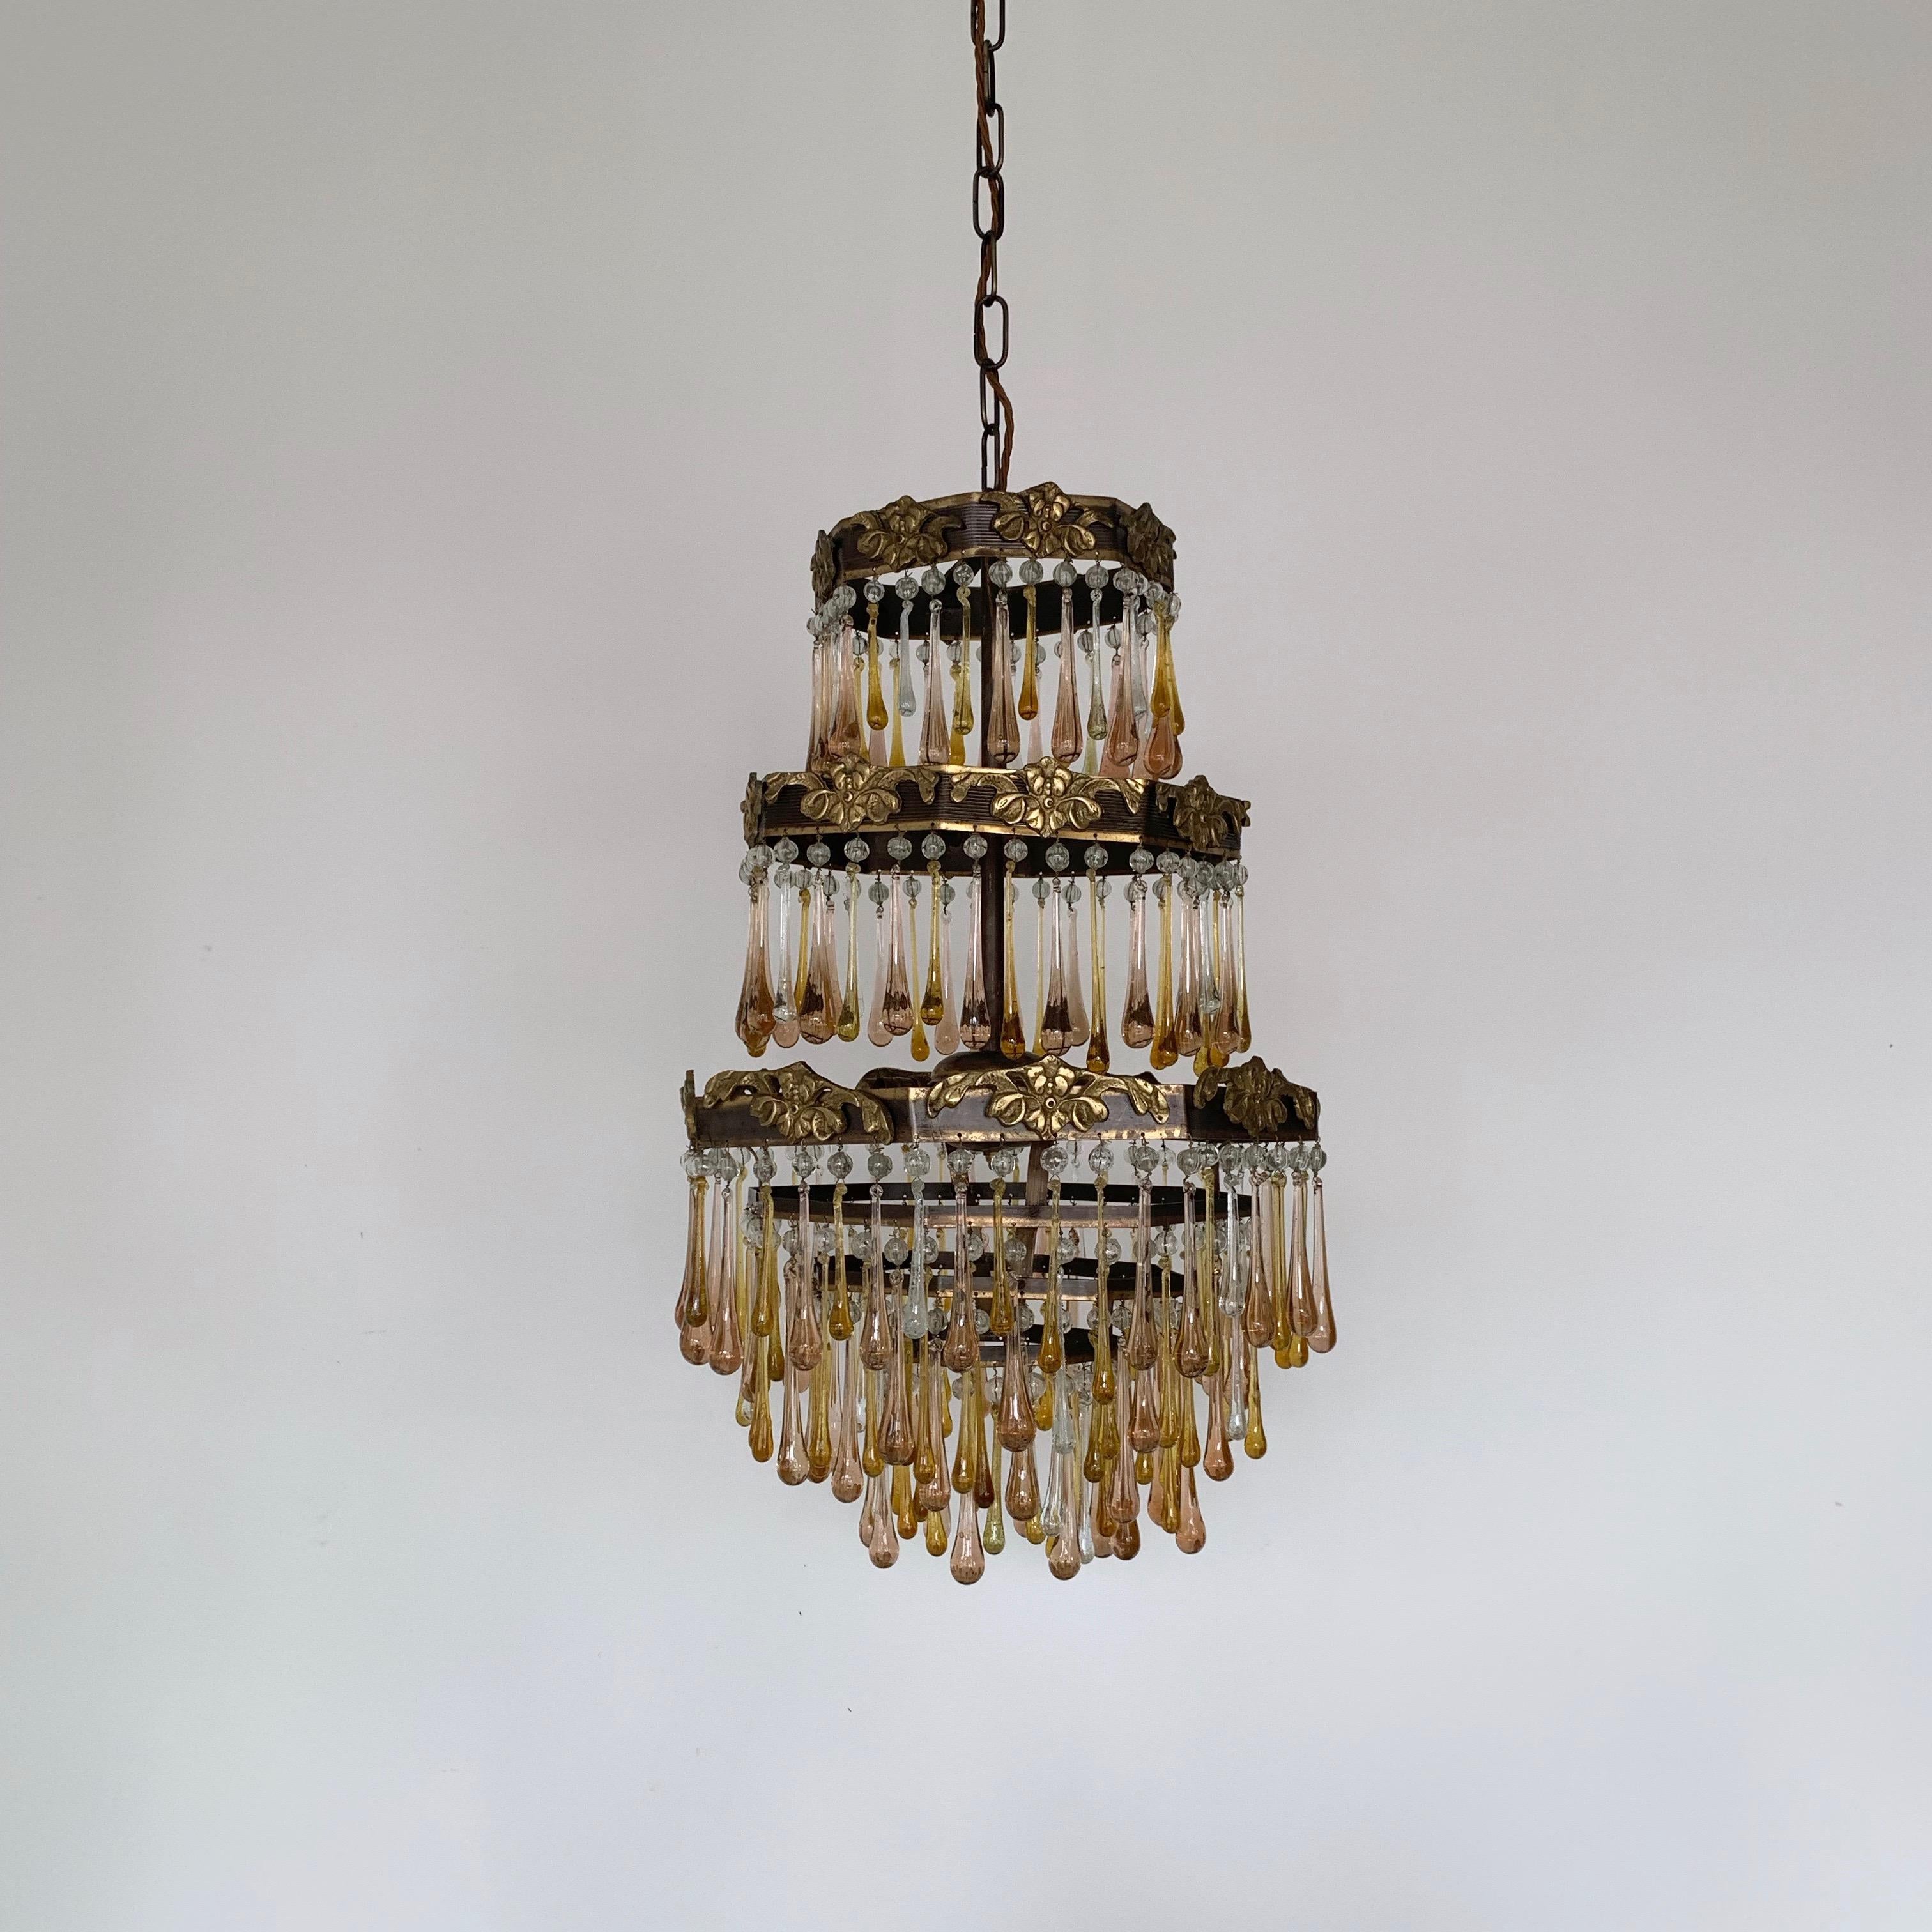 Early 1900s French Brass Waterfall Chandelier Frame Dressed in Peach and Amber For Sale 6